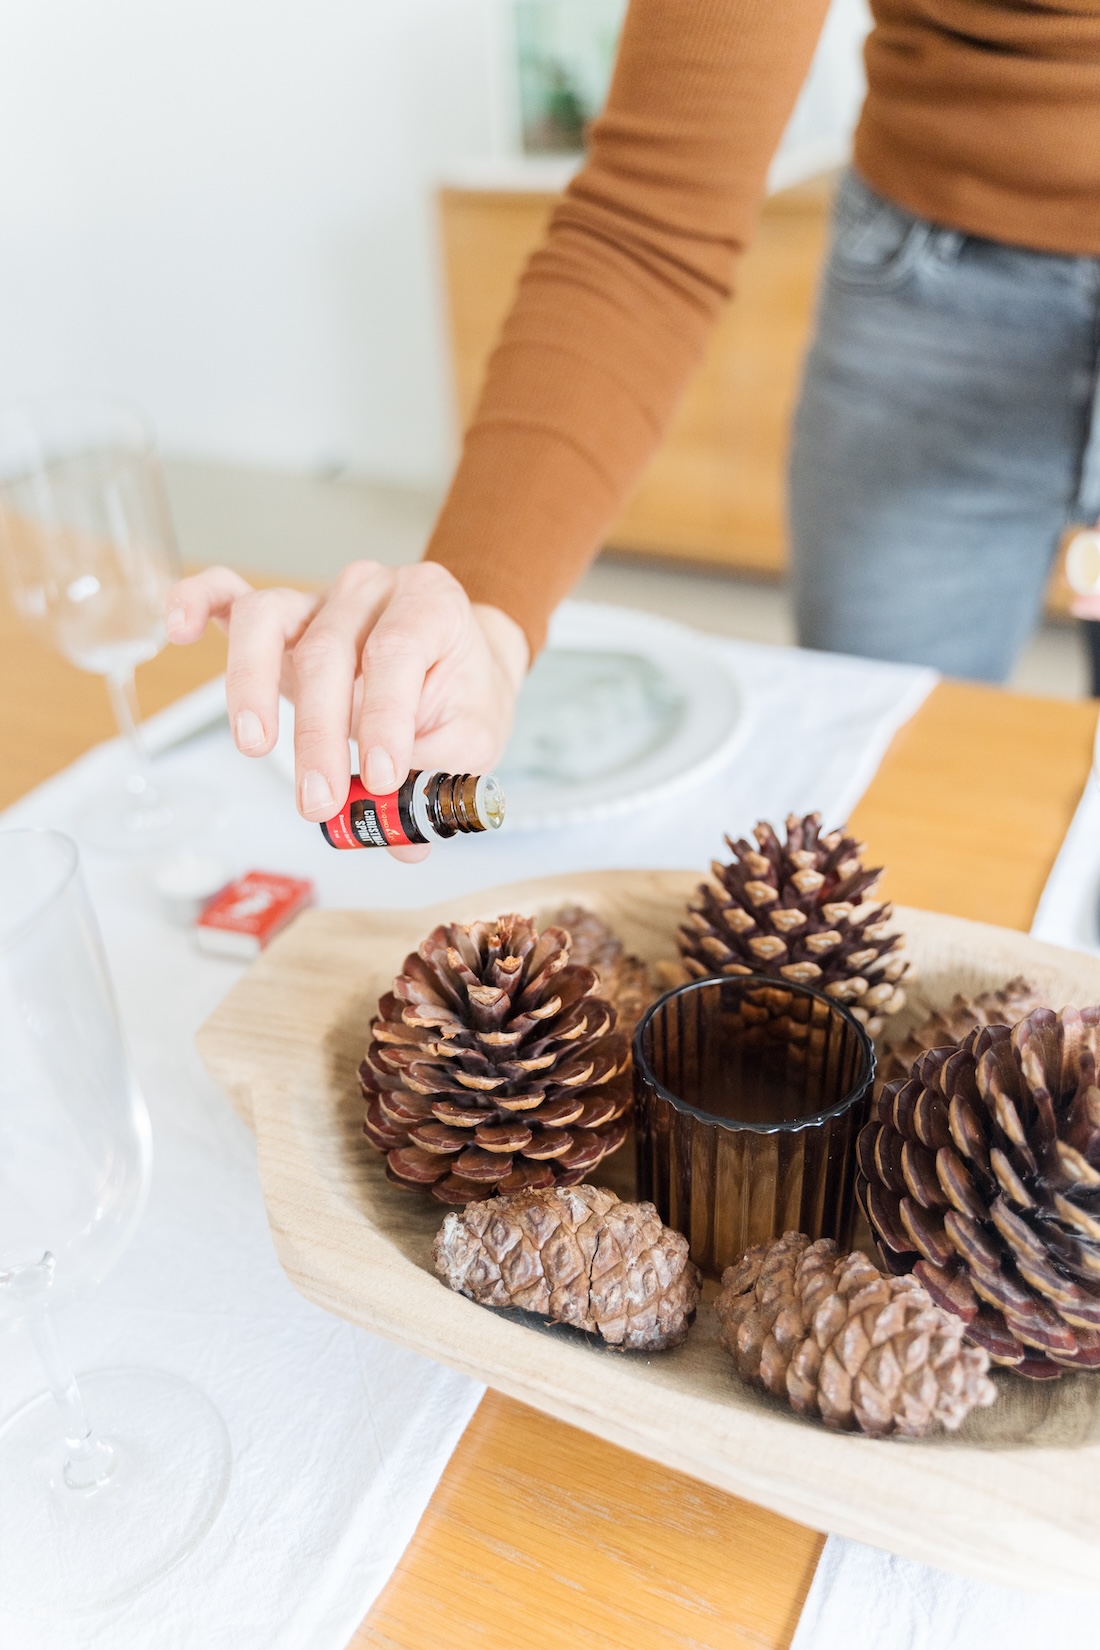 Make your home smell like Christmas with this scented pinecone centrepiece